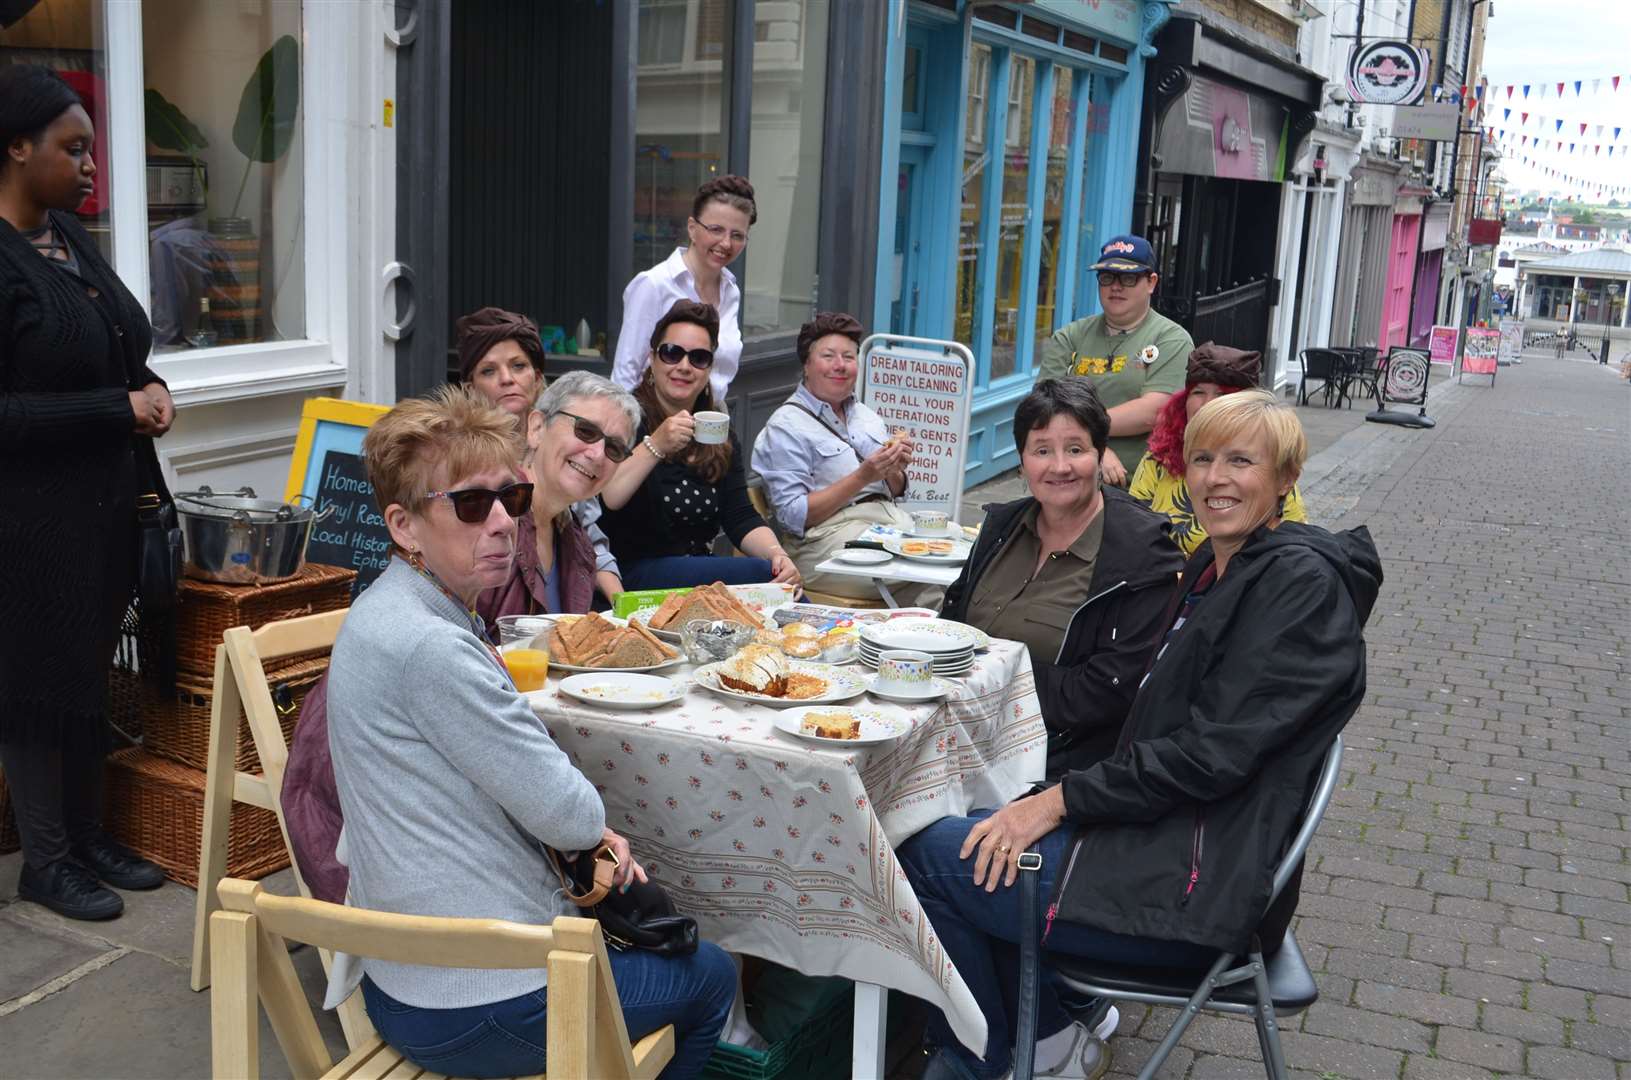 Others enjoyed some fresh sandwiches and cakes in town to celebrate the 75th anniversary of D-Day. Picture: Jason Arthur (11910665)